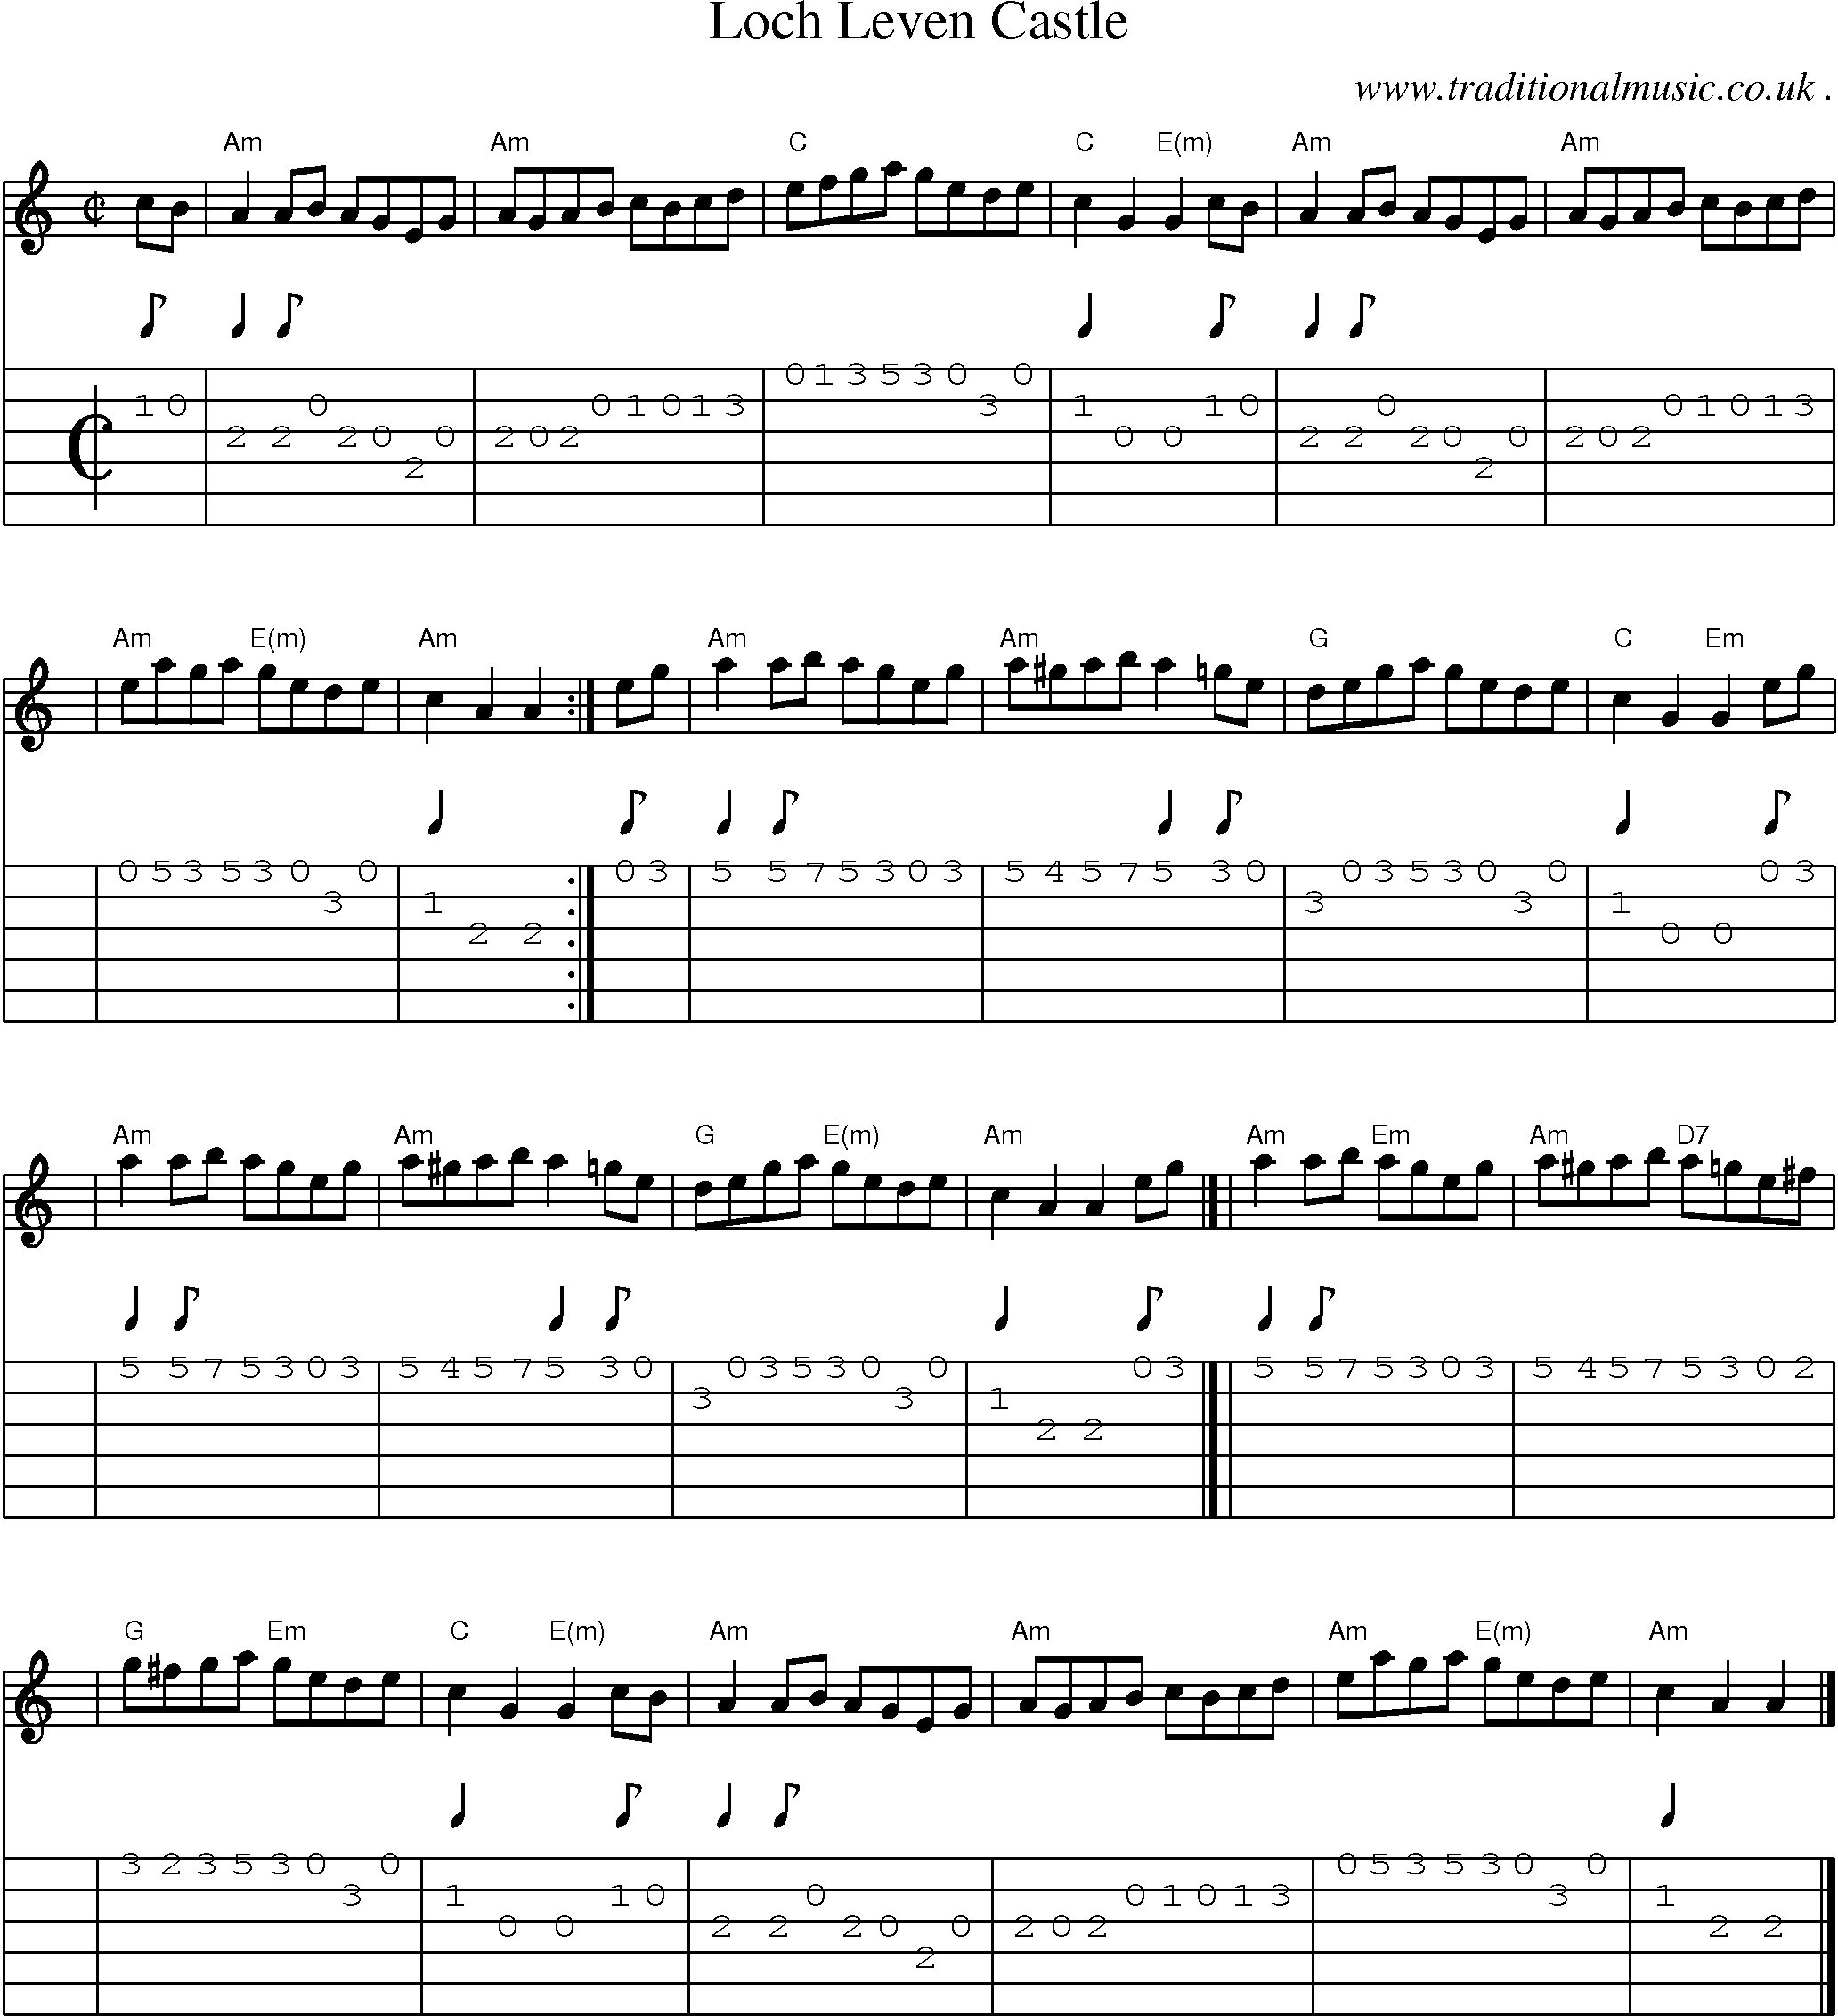 Sheet-music  score, Chords and Guitar Tabs for Loch Leven Castle